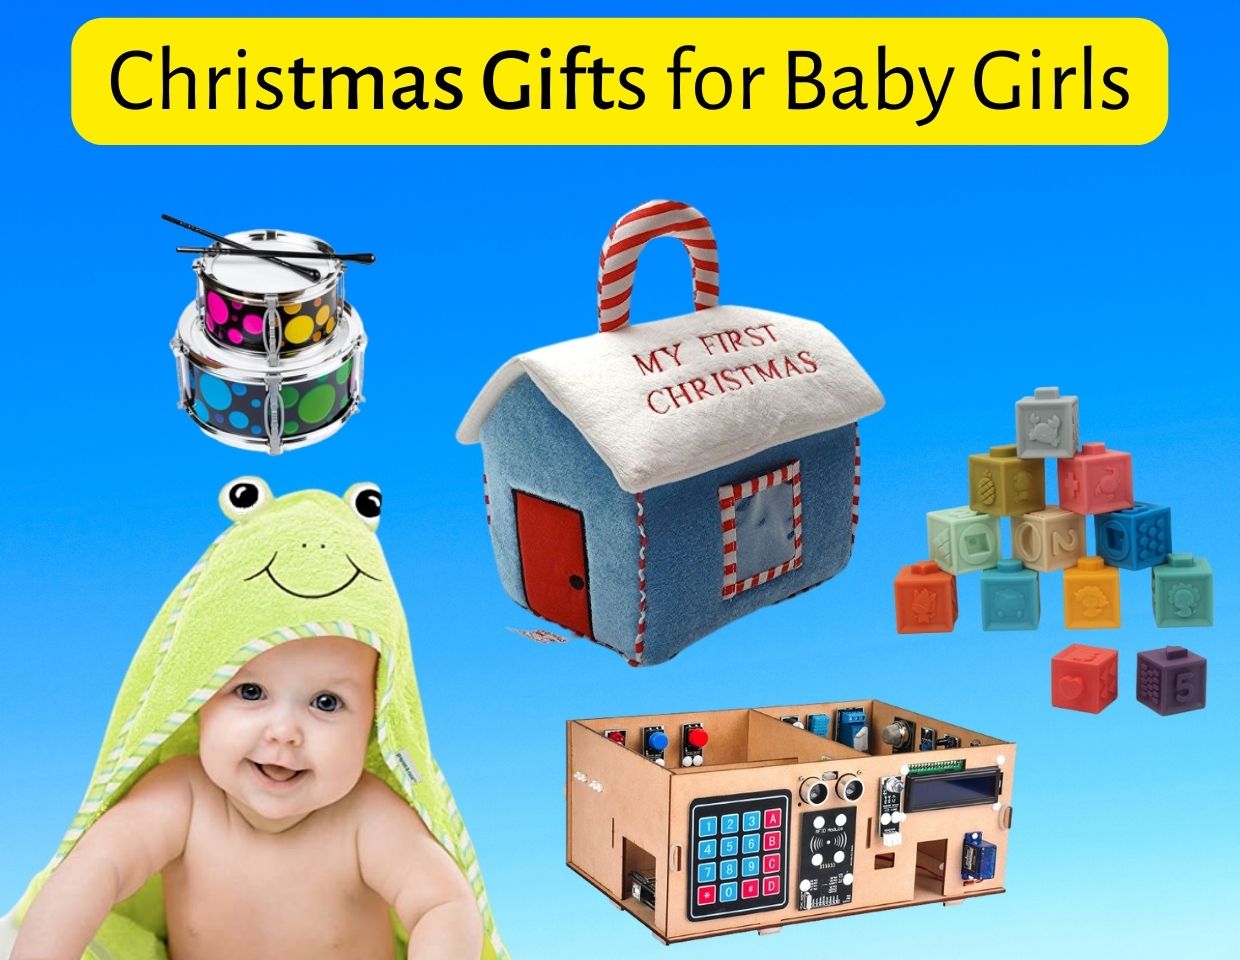 Christmas Gifts for Baby Girls